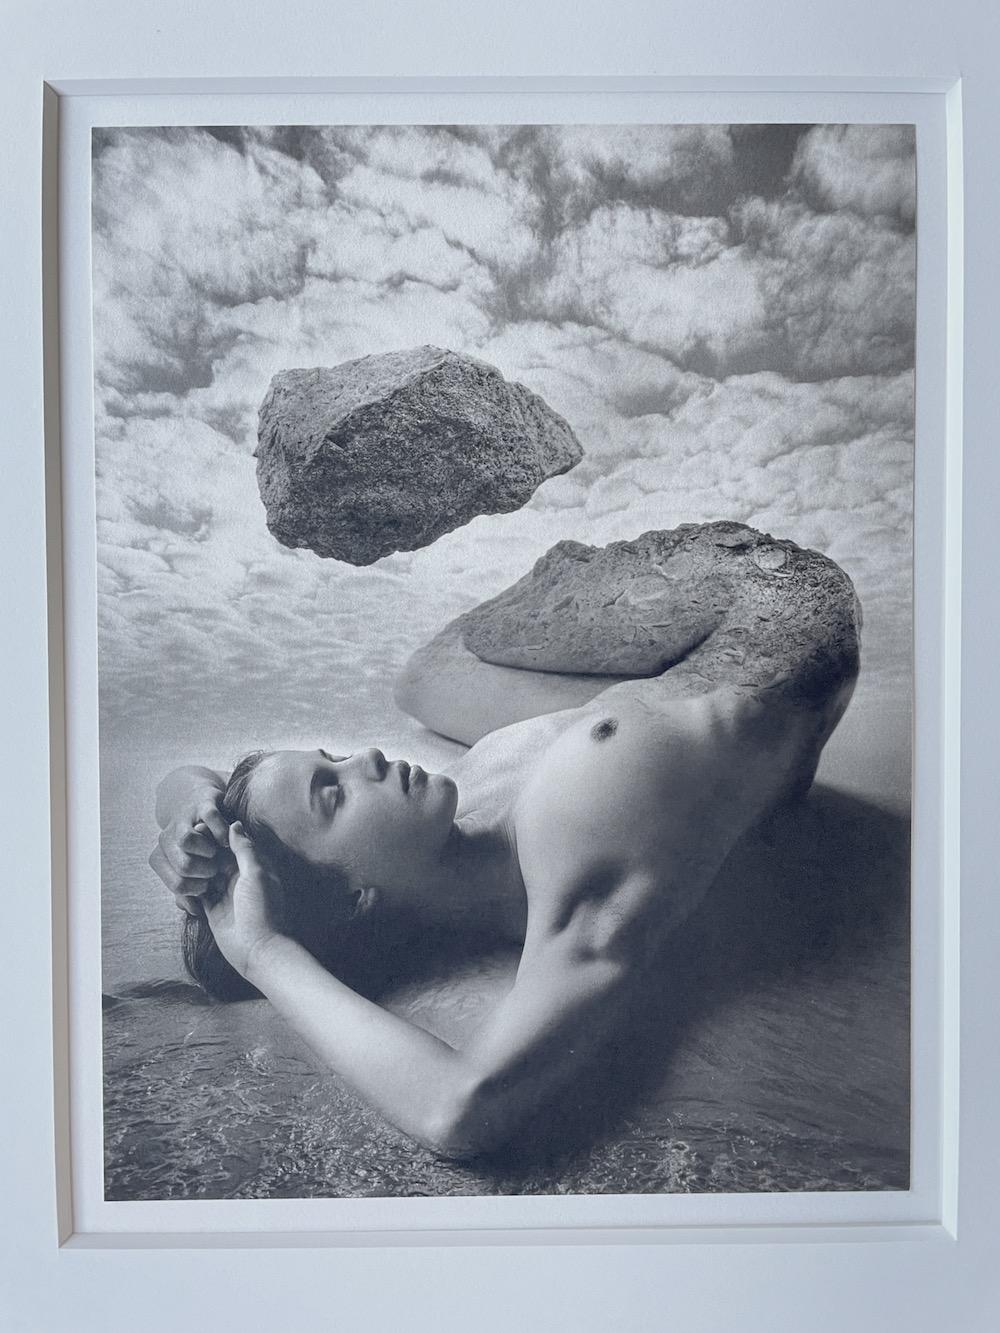 Door of Deception - Nude With Rocks Surf, Double Exposure - Photograph by Jerry Uelsmann